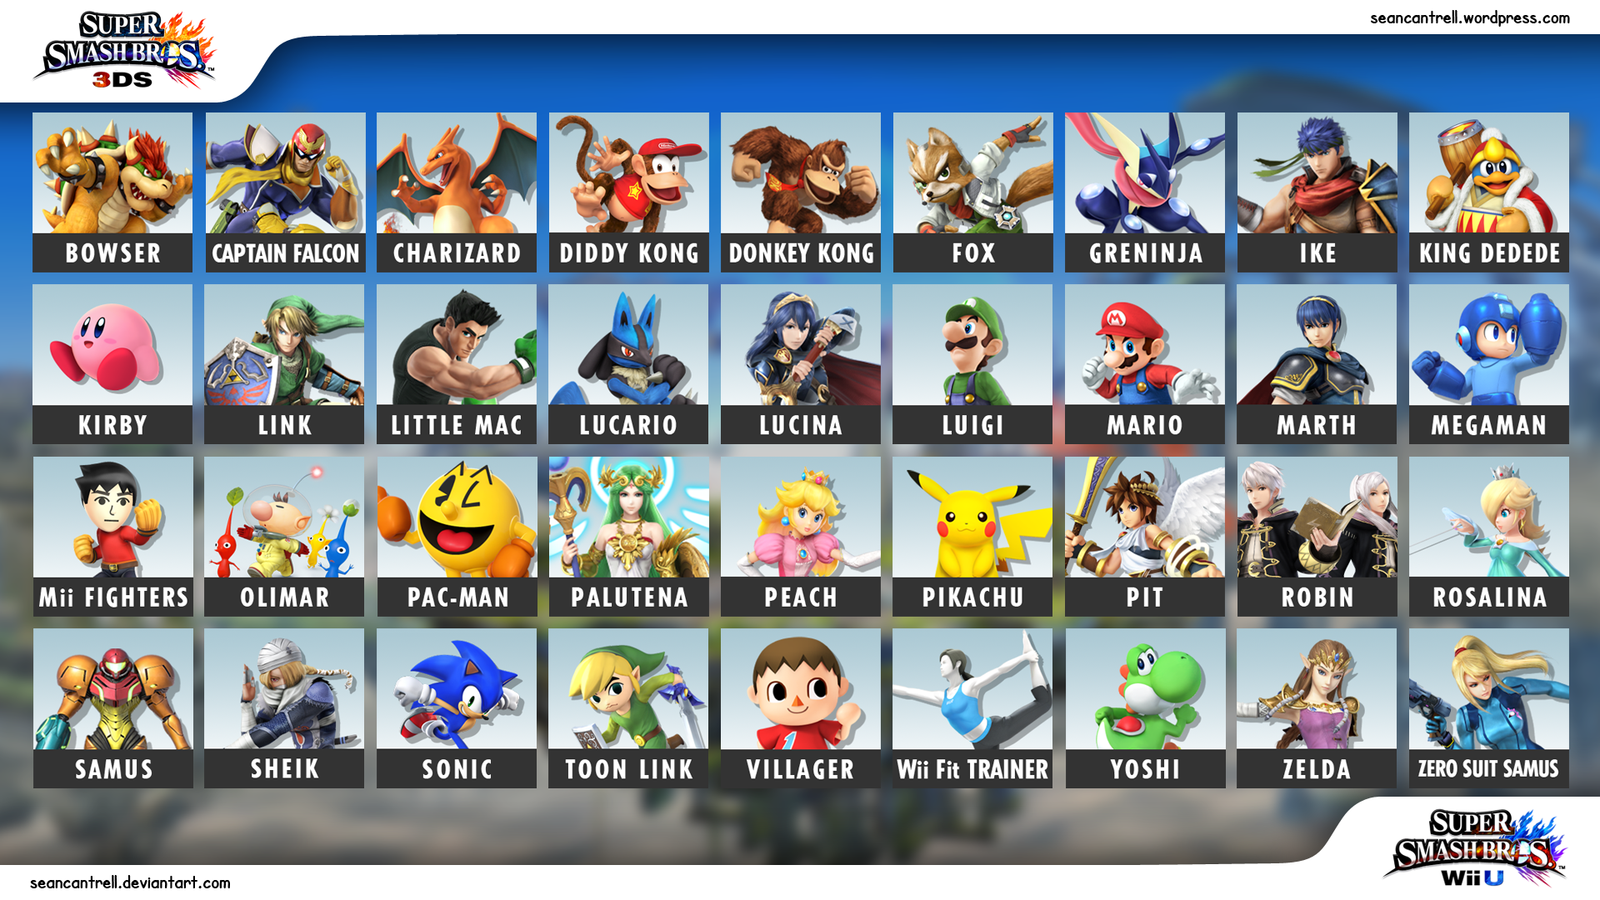 Super Smash Bros Wii U 3ds Character Selection By Seancantrell On